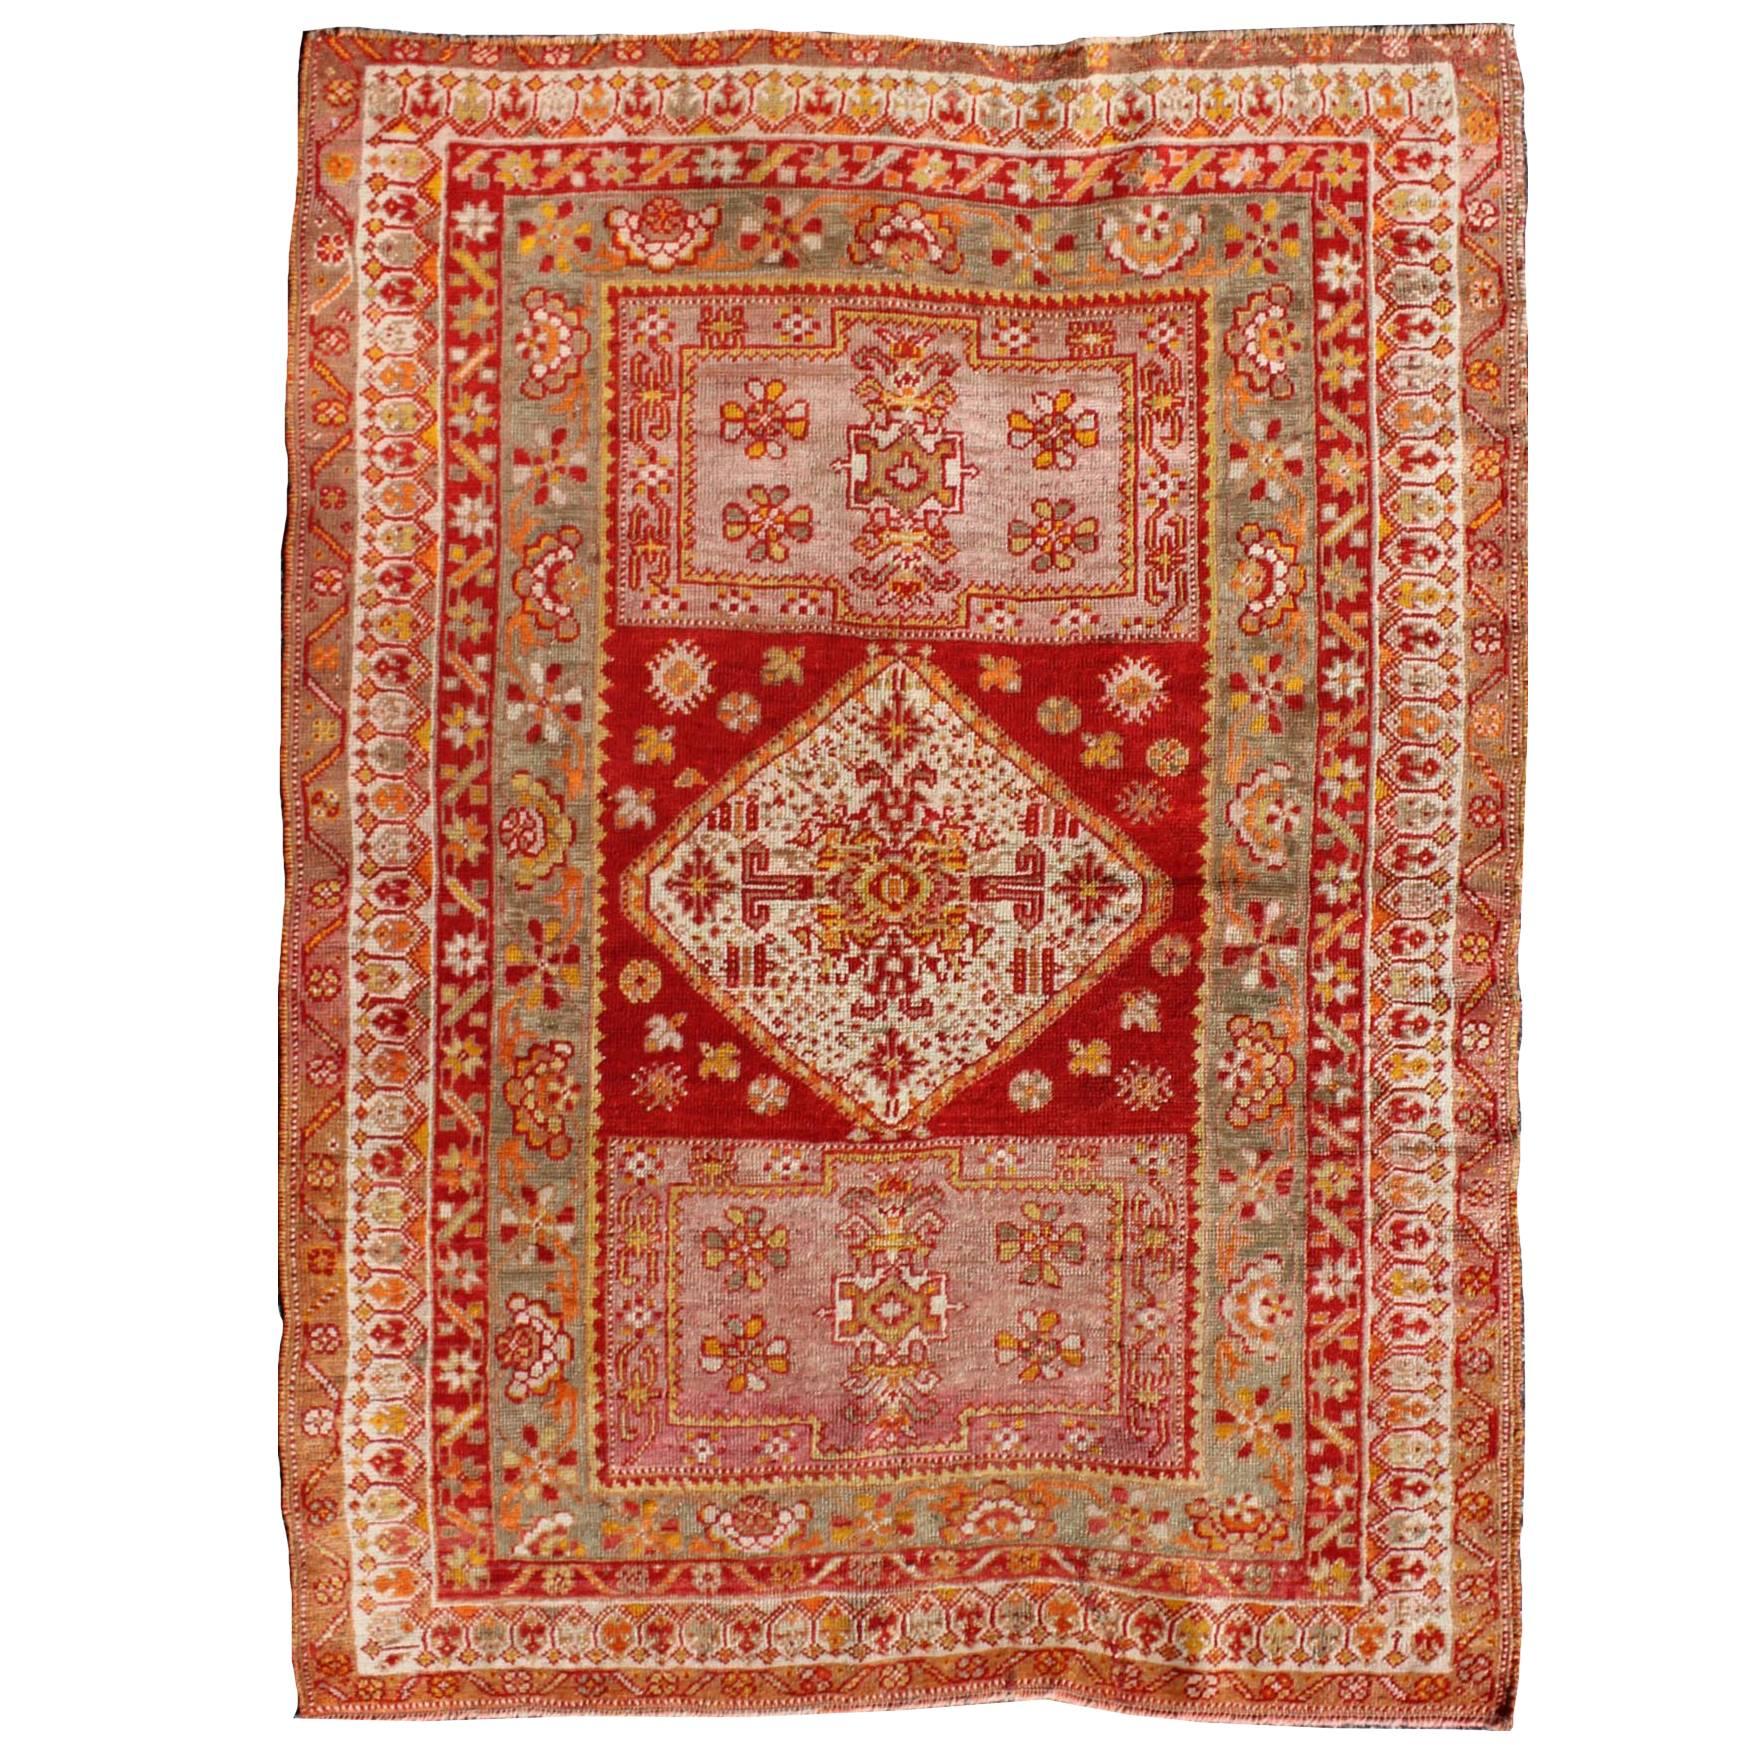 Antique Turkish Oushak Rug with Colorful Flowing Floral and Geometric Motifs